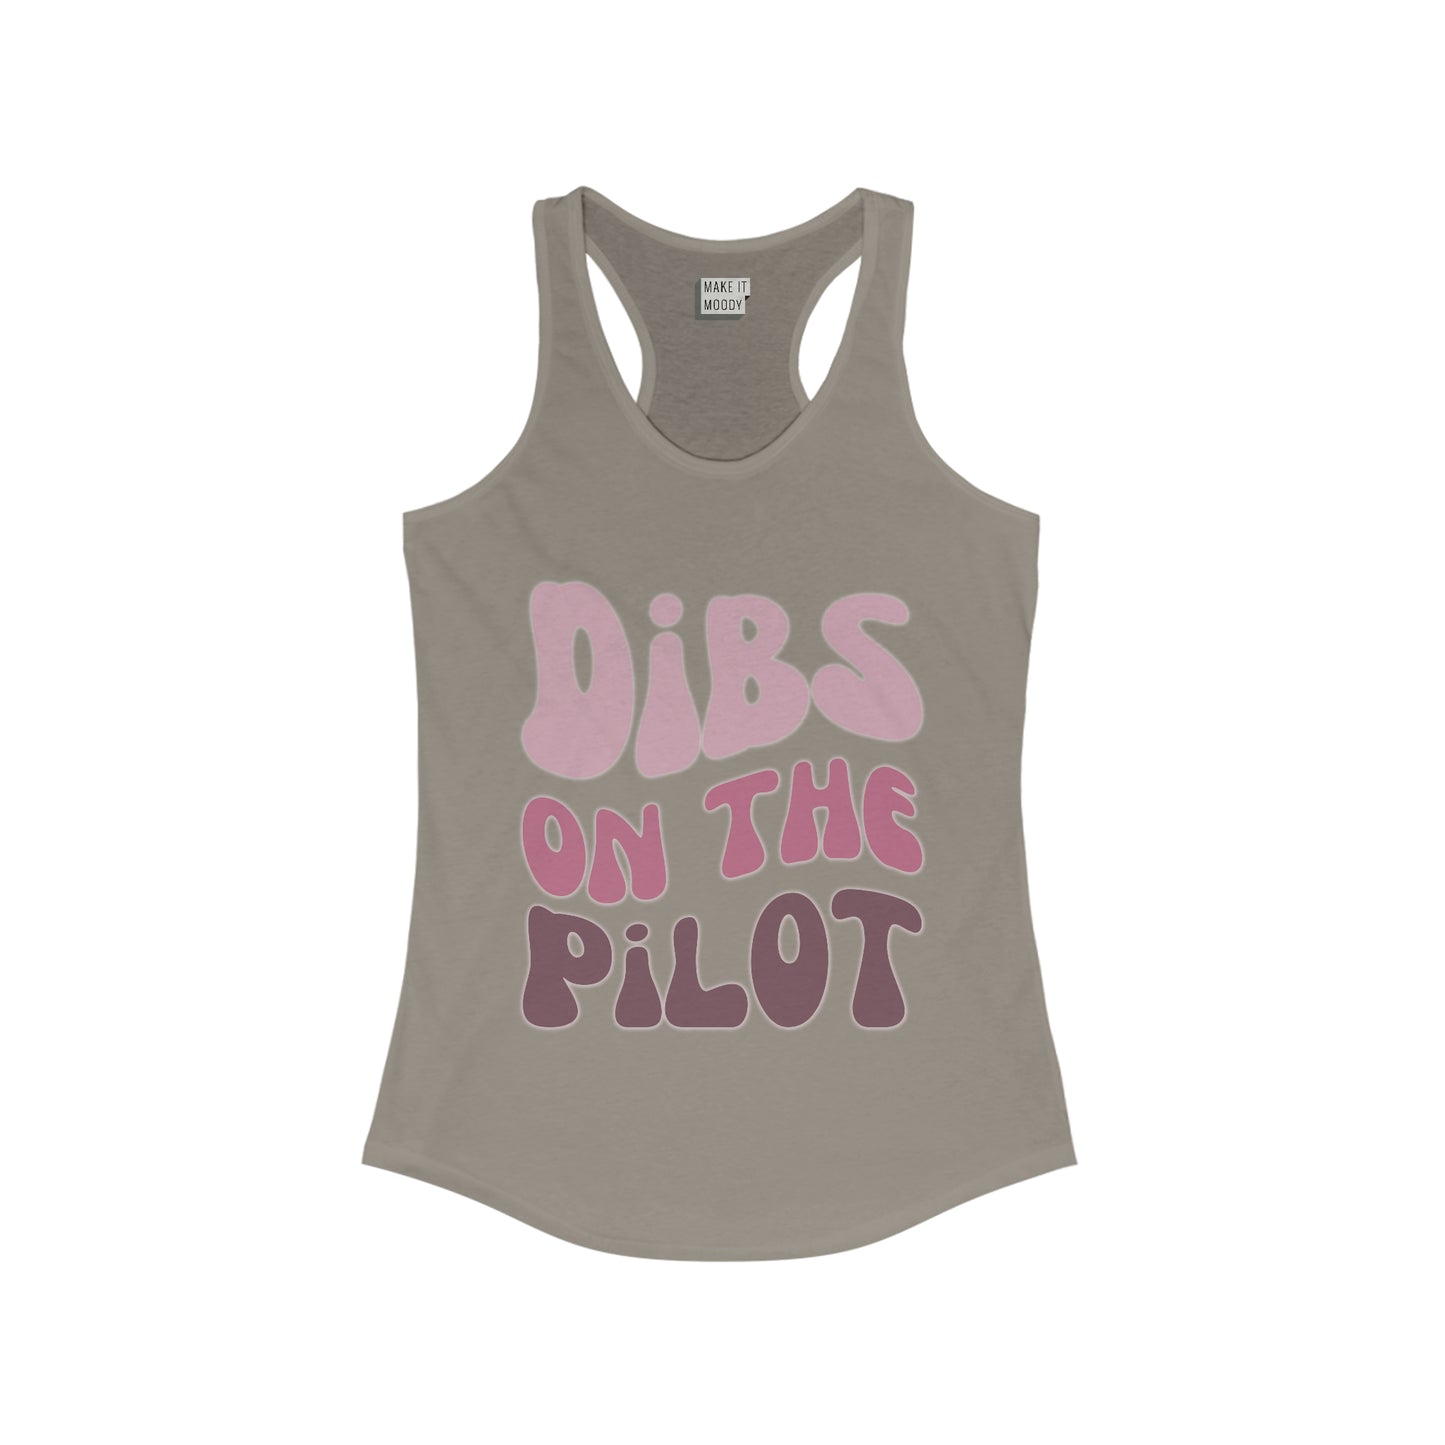 grey funny aviation shirt, "dibs on the pilot"